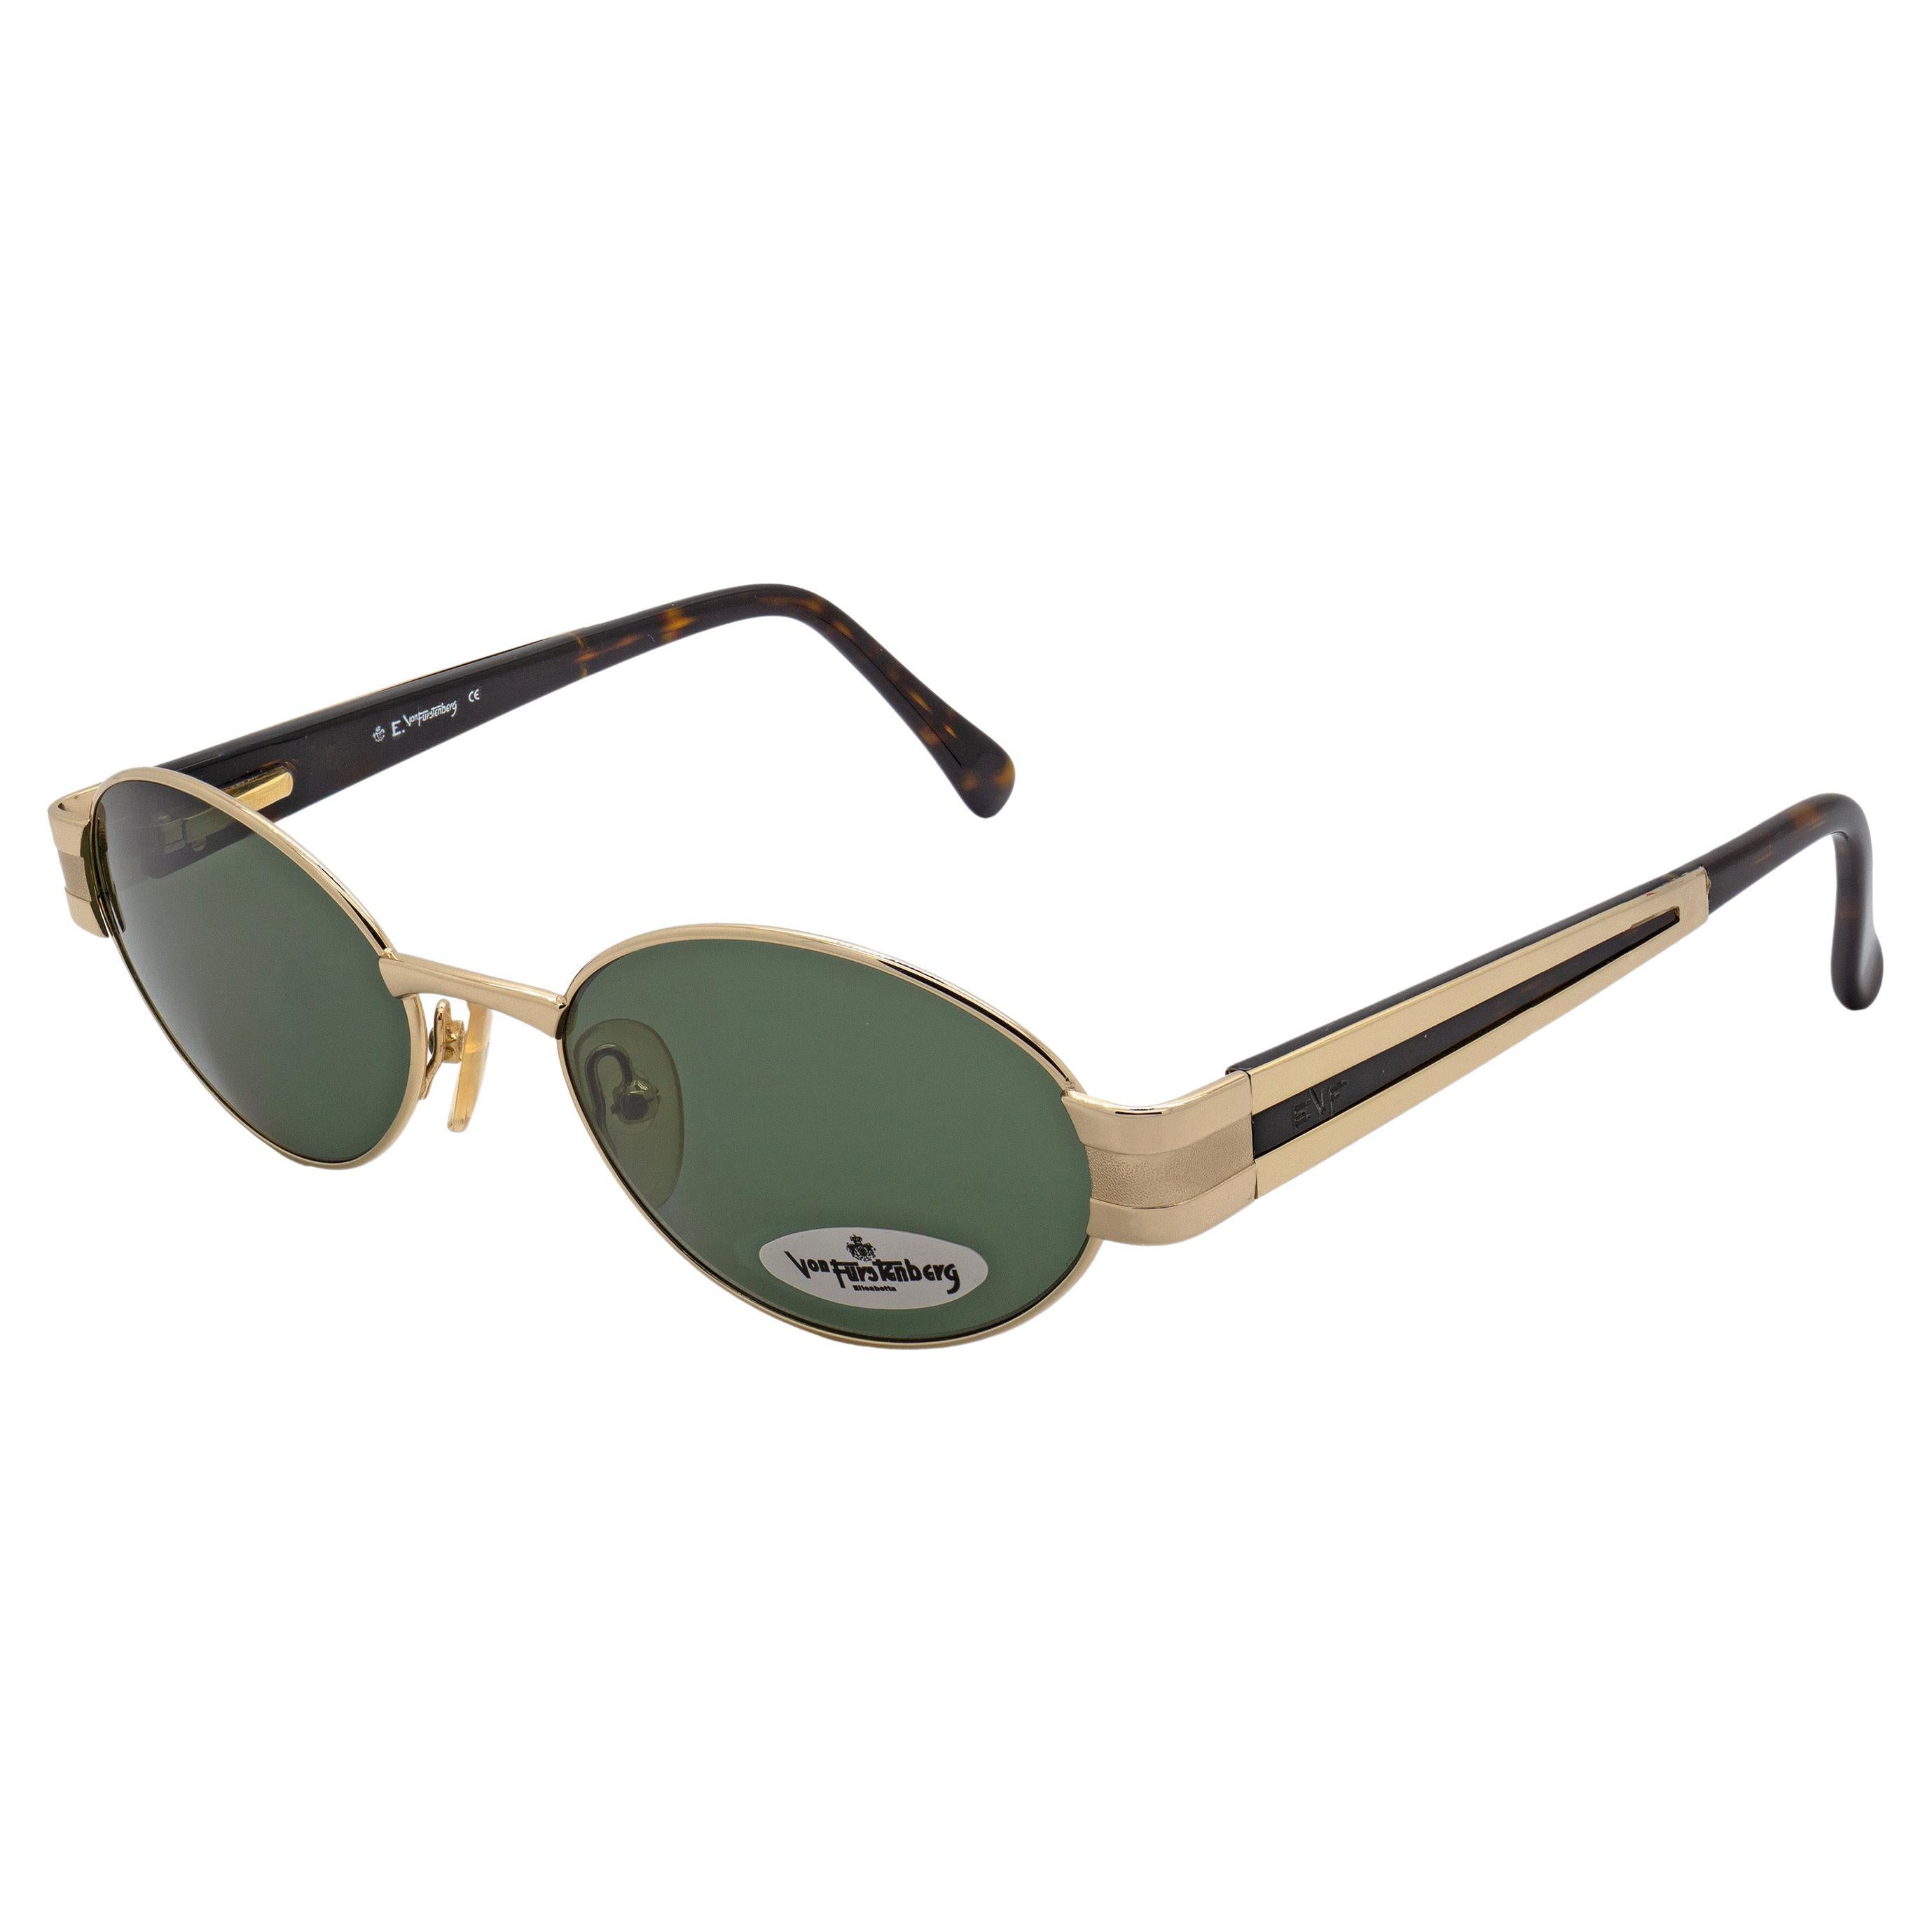 Egon von Furstenberg oval sunglasses spring hinges, made in Italy For Sale